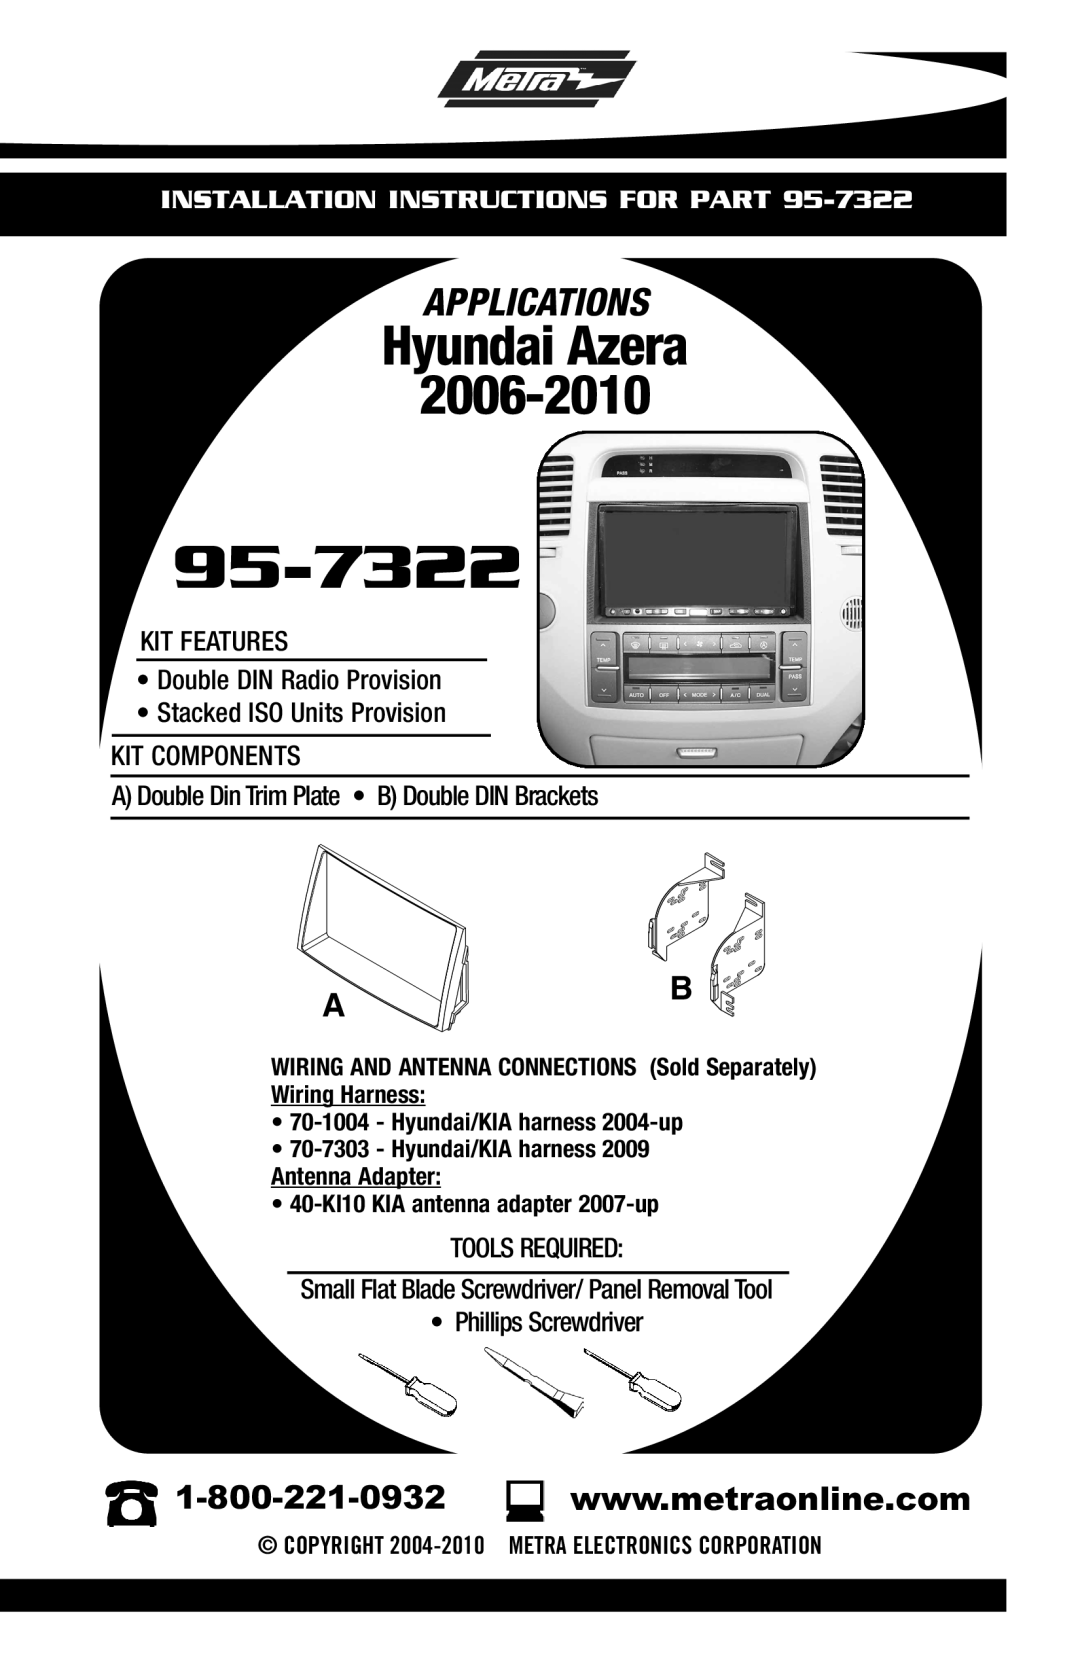 Metra Electronics 95-7322 installation instructions Hyundai Azera, Applications, Installation Instructions For Part 